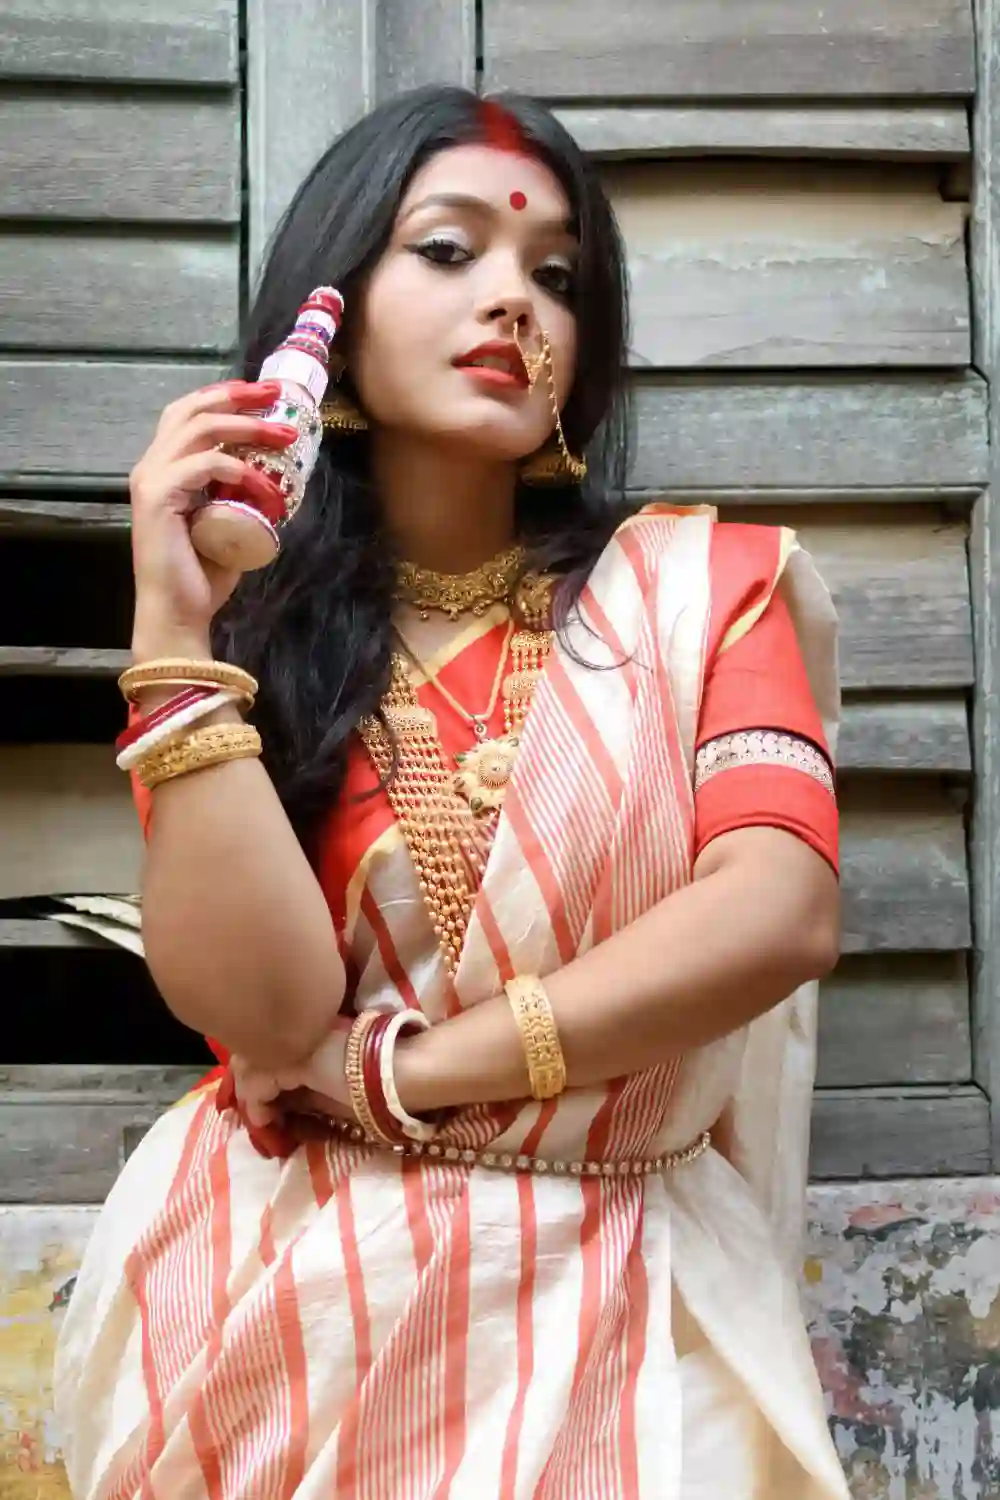 Indian woman wearing traditional Indian dress